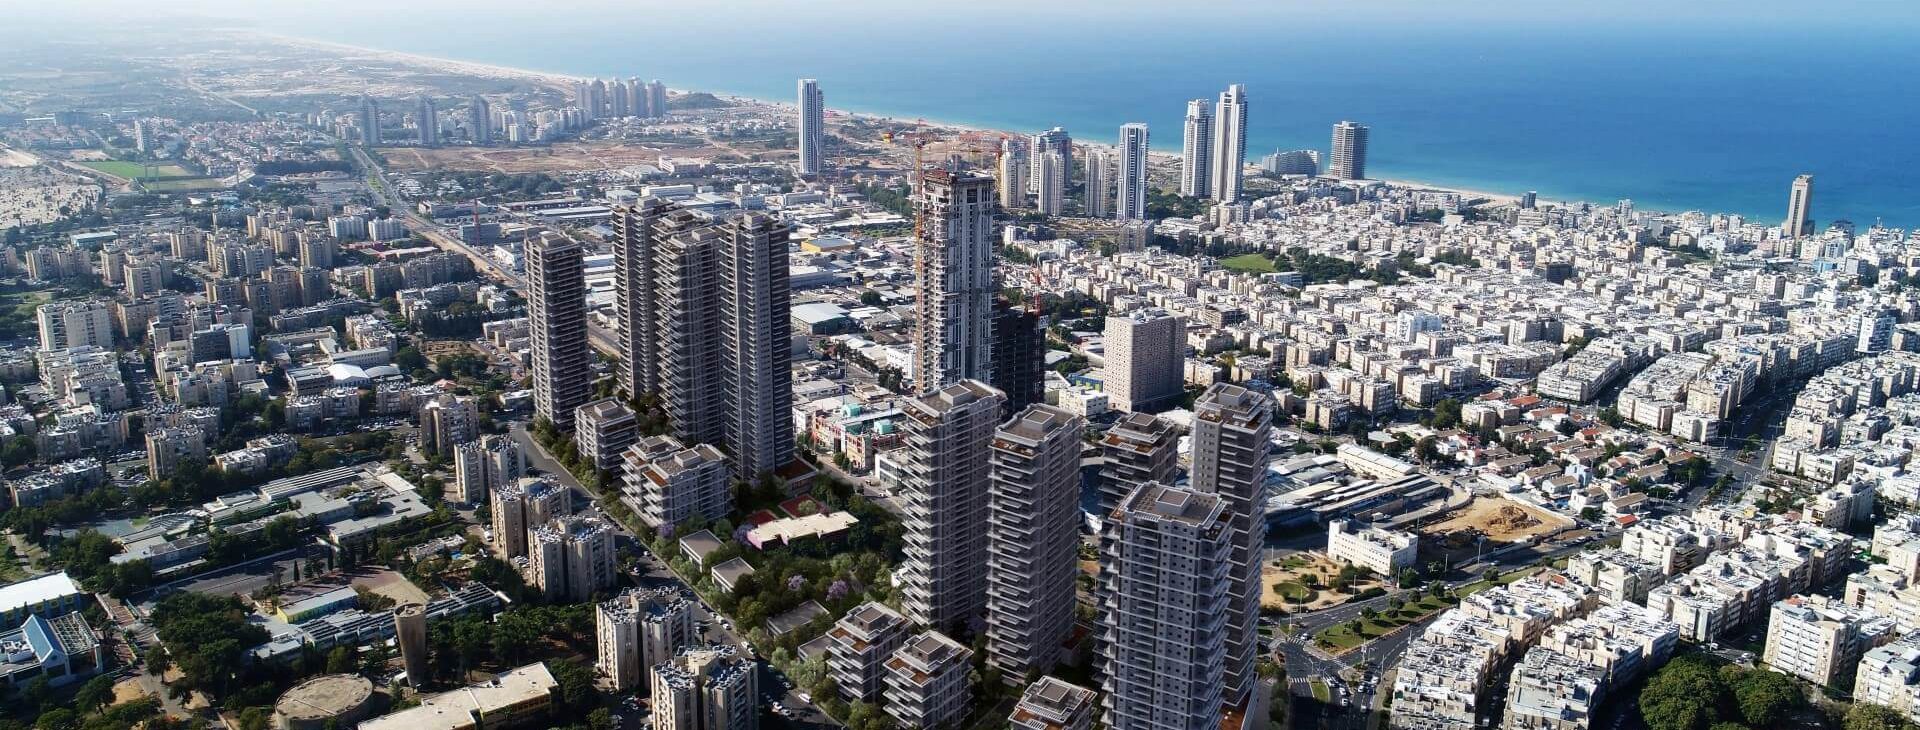 Simulation of buildings in the green UNIK project in Bat Yam